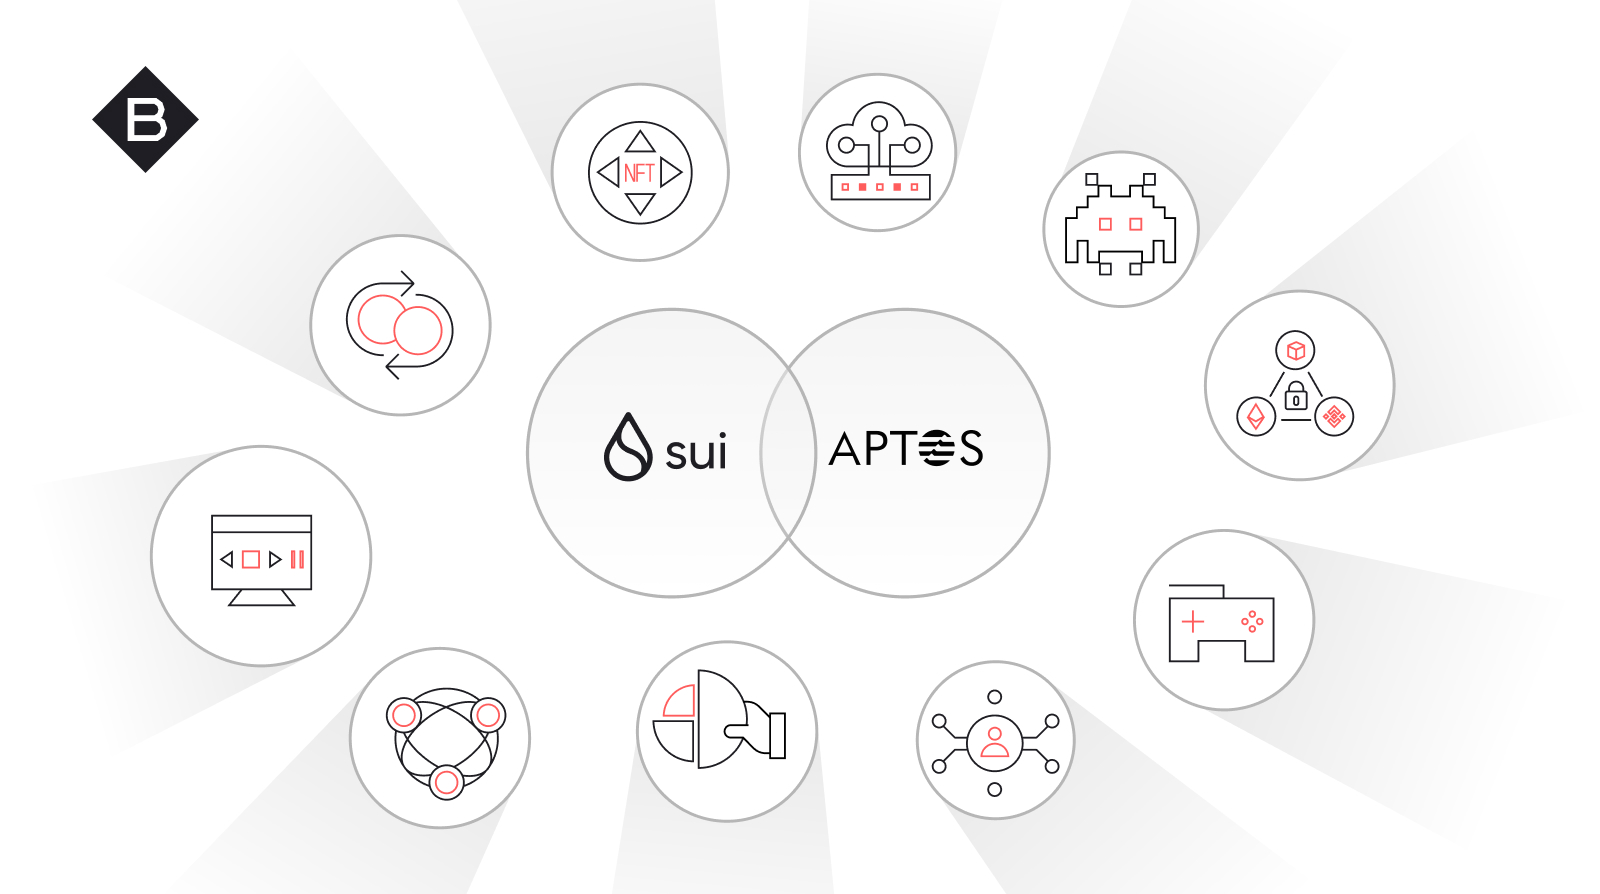 The ecosystems are very different and extensive in both Sui and Apros blockchains.